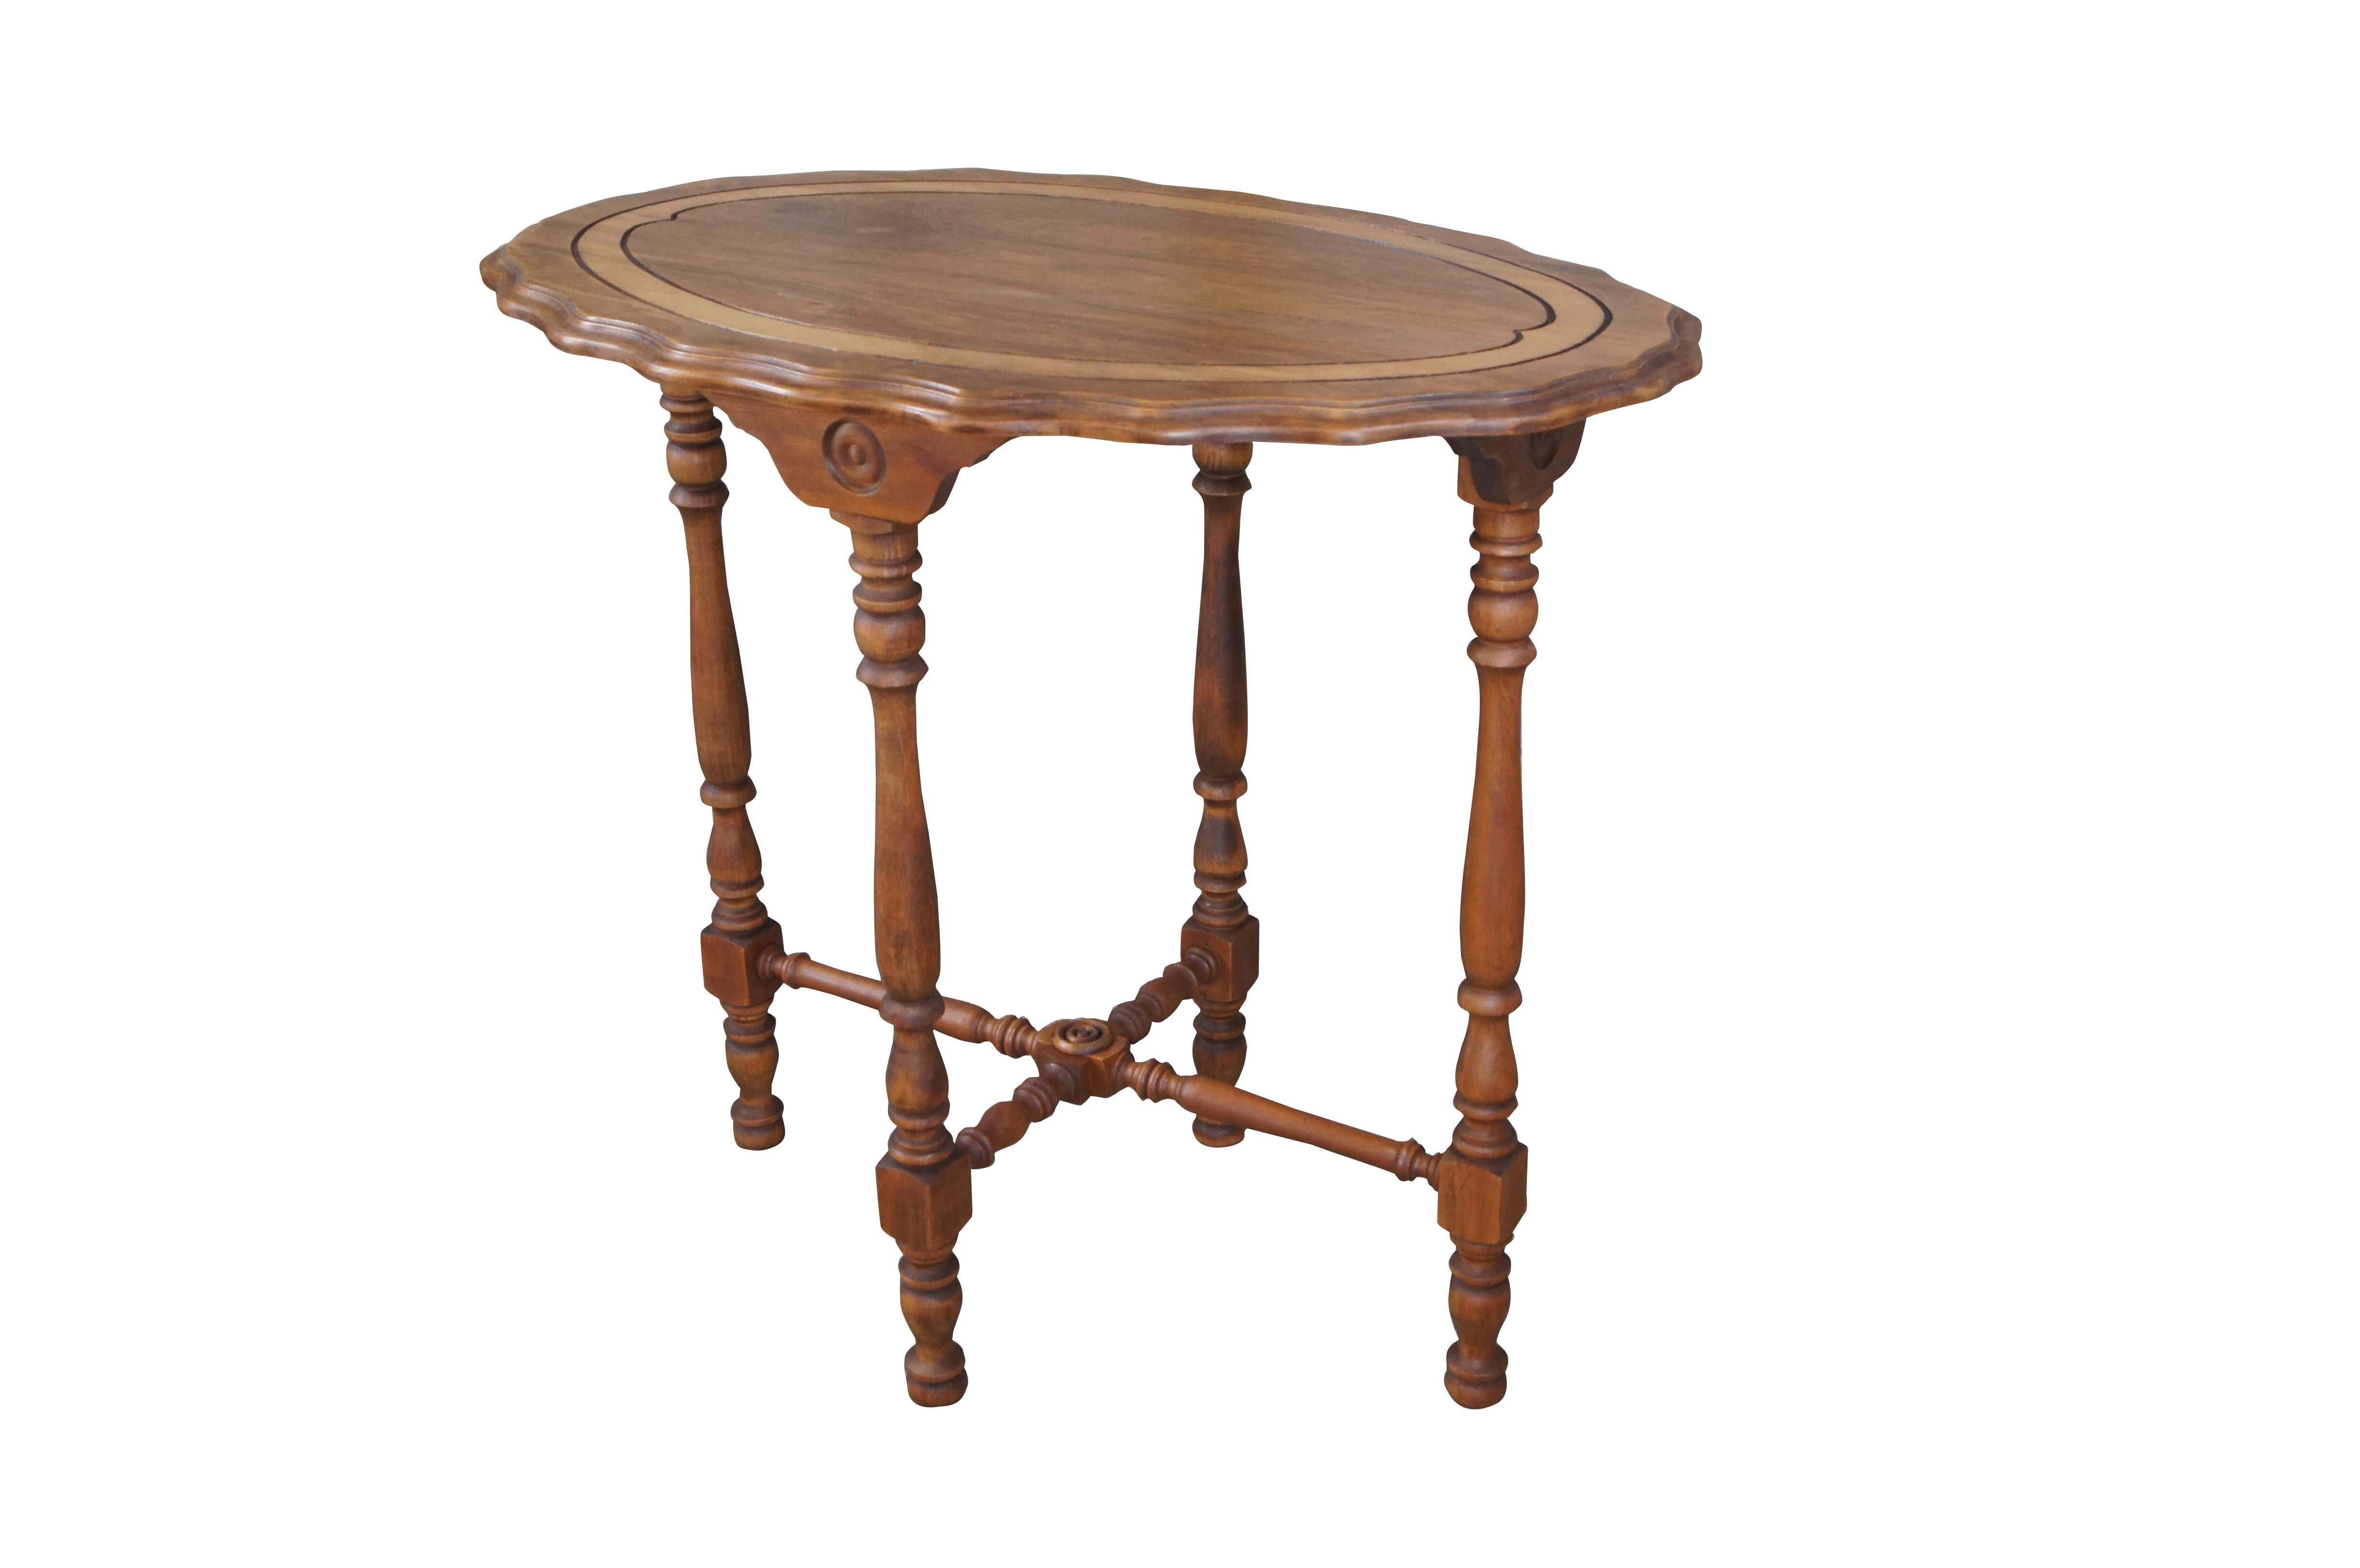 Antique Eastlake Victorian Maple Oval Scalloped Serpentine Parlor Side Table  In Good Condition For Sale In Dayton, OH